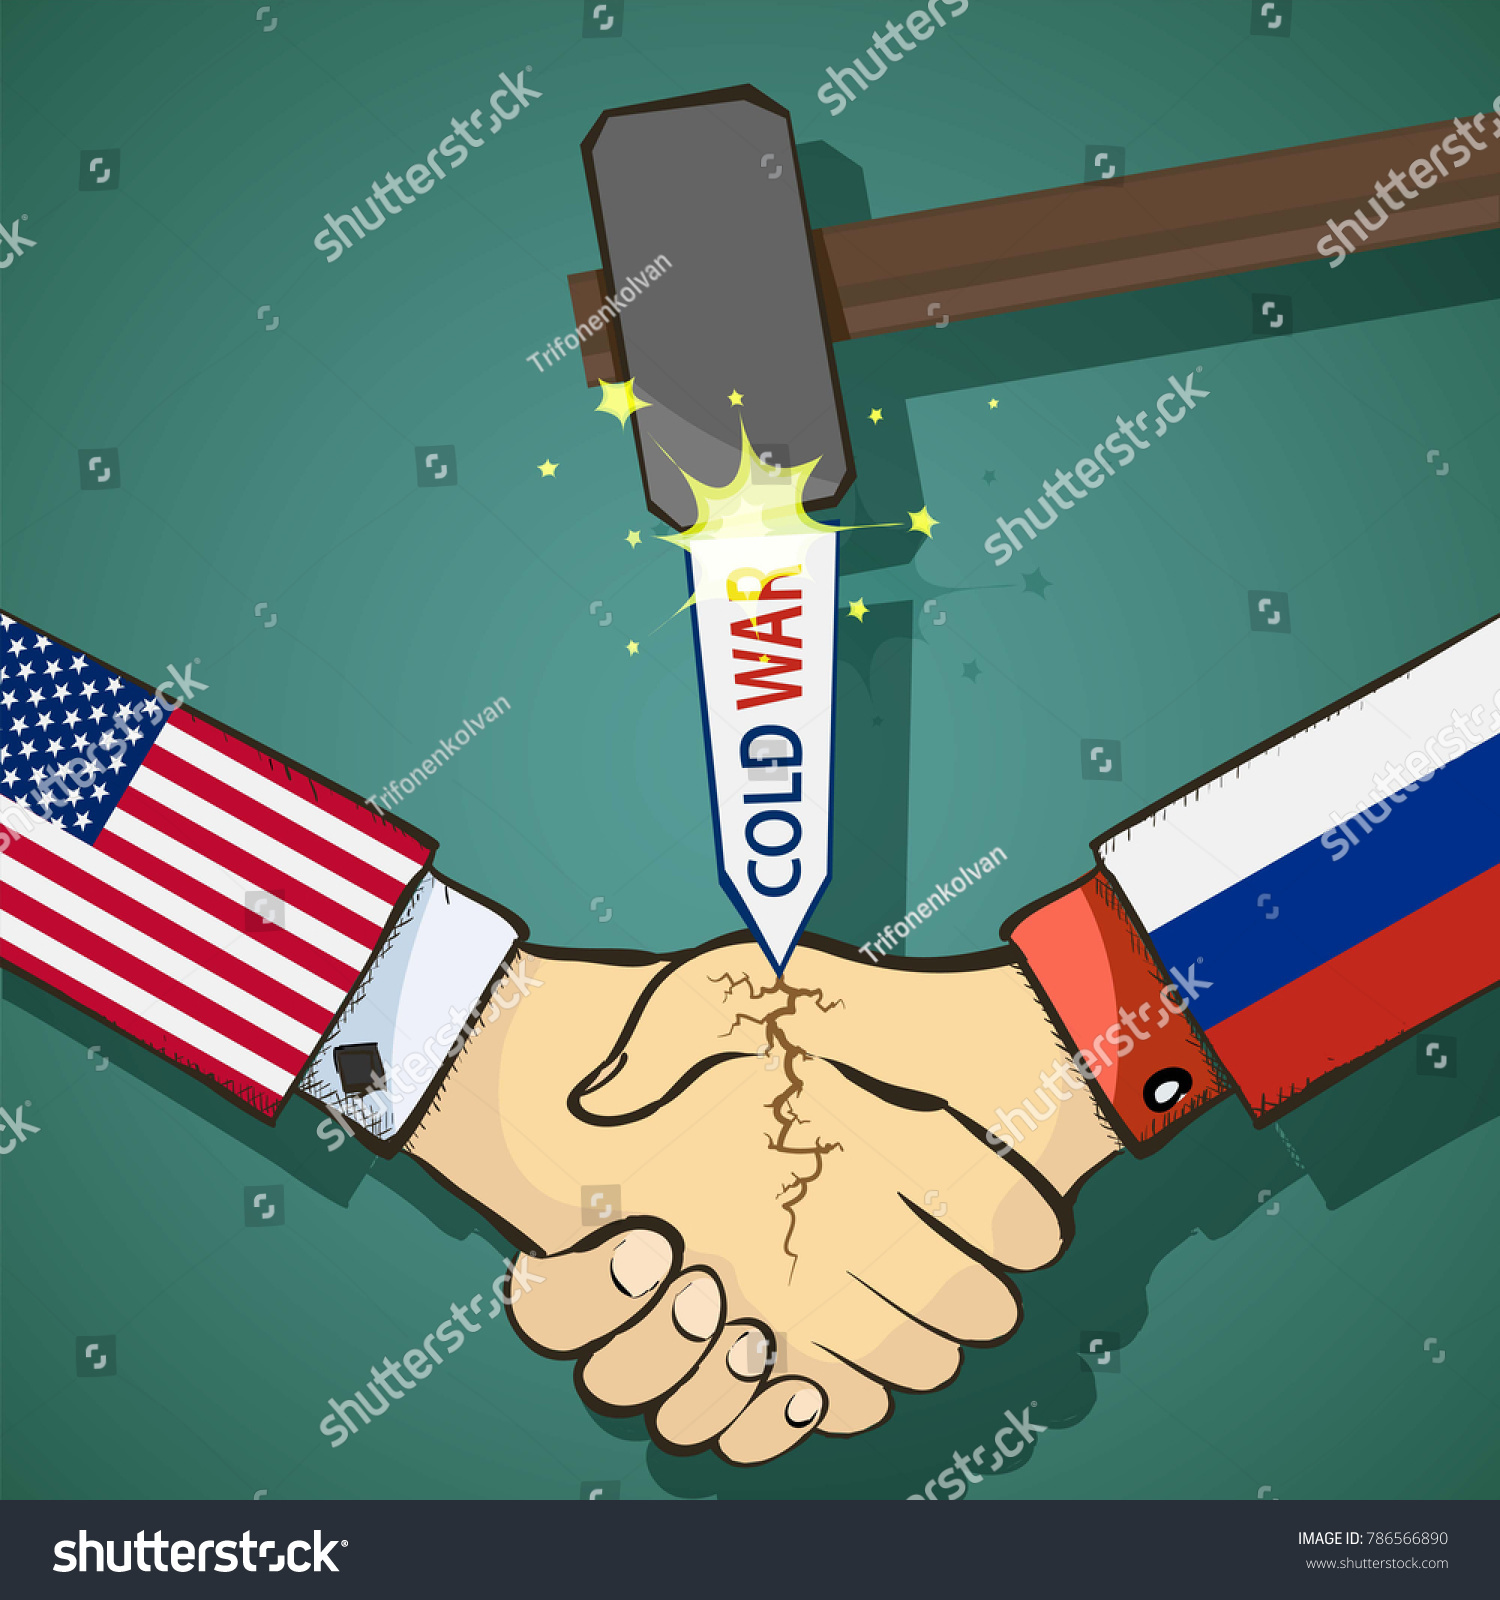 Cold war between the USA and Russia. Handshake of two people. Stock flat graphic illustration. #786566890